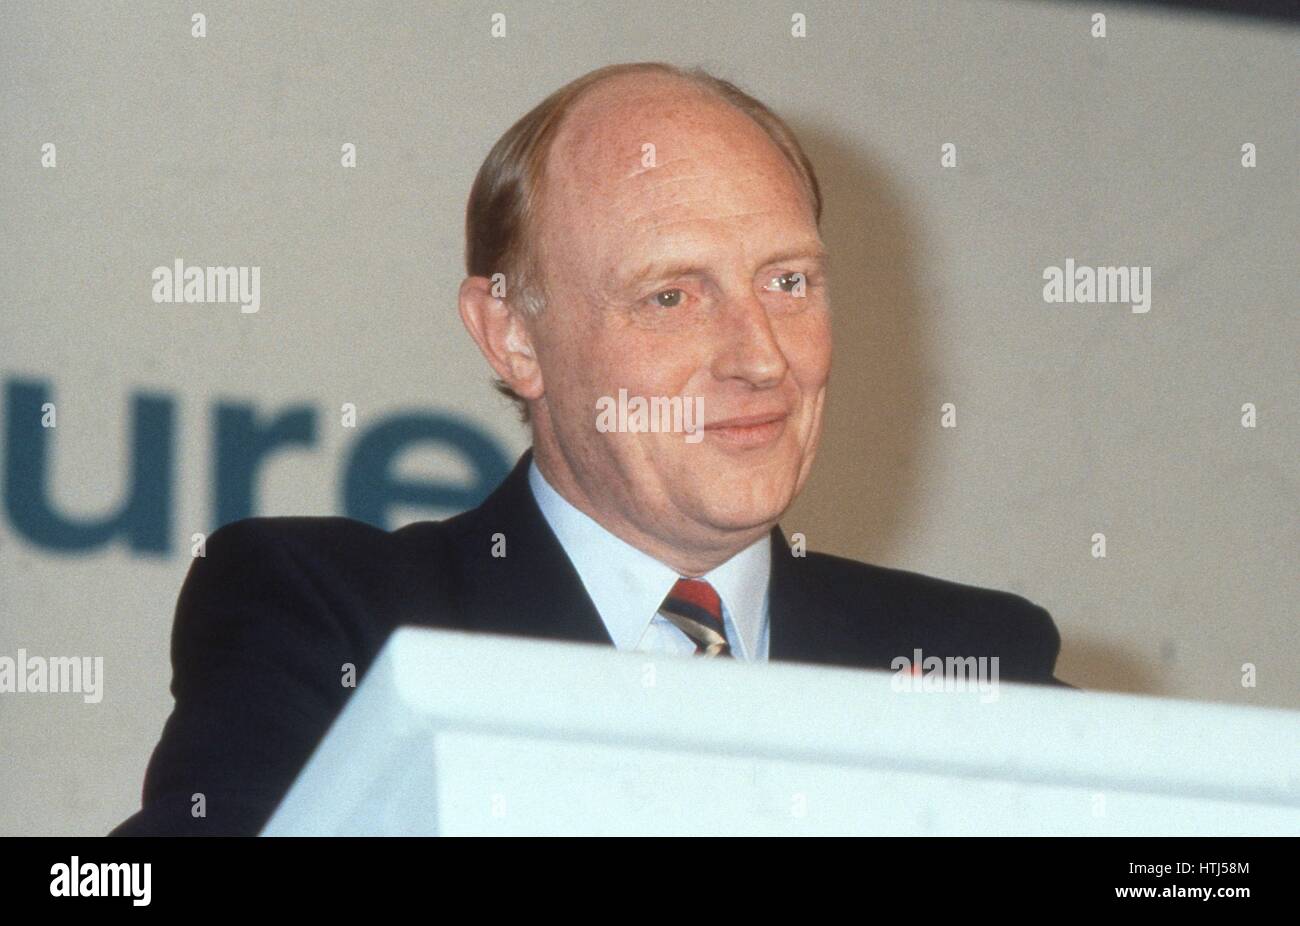 Rt. Hon. Neil Kinnock, Leader of the Labour party and Member of Parliament for Islwyn, speaks at a party policy launch in London, England on May 24, 1990. Stock Photo